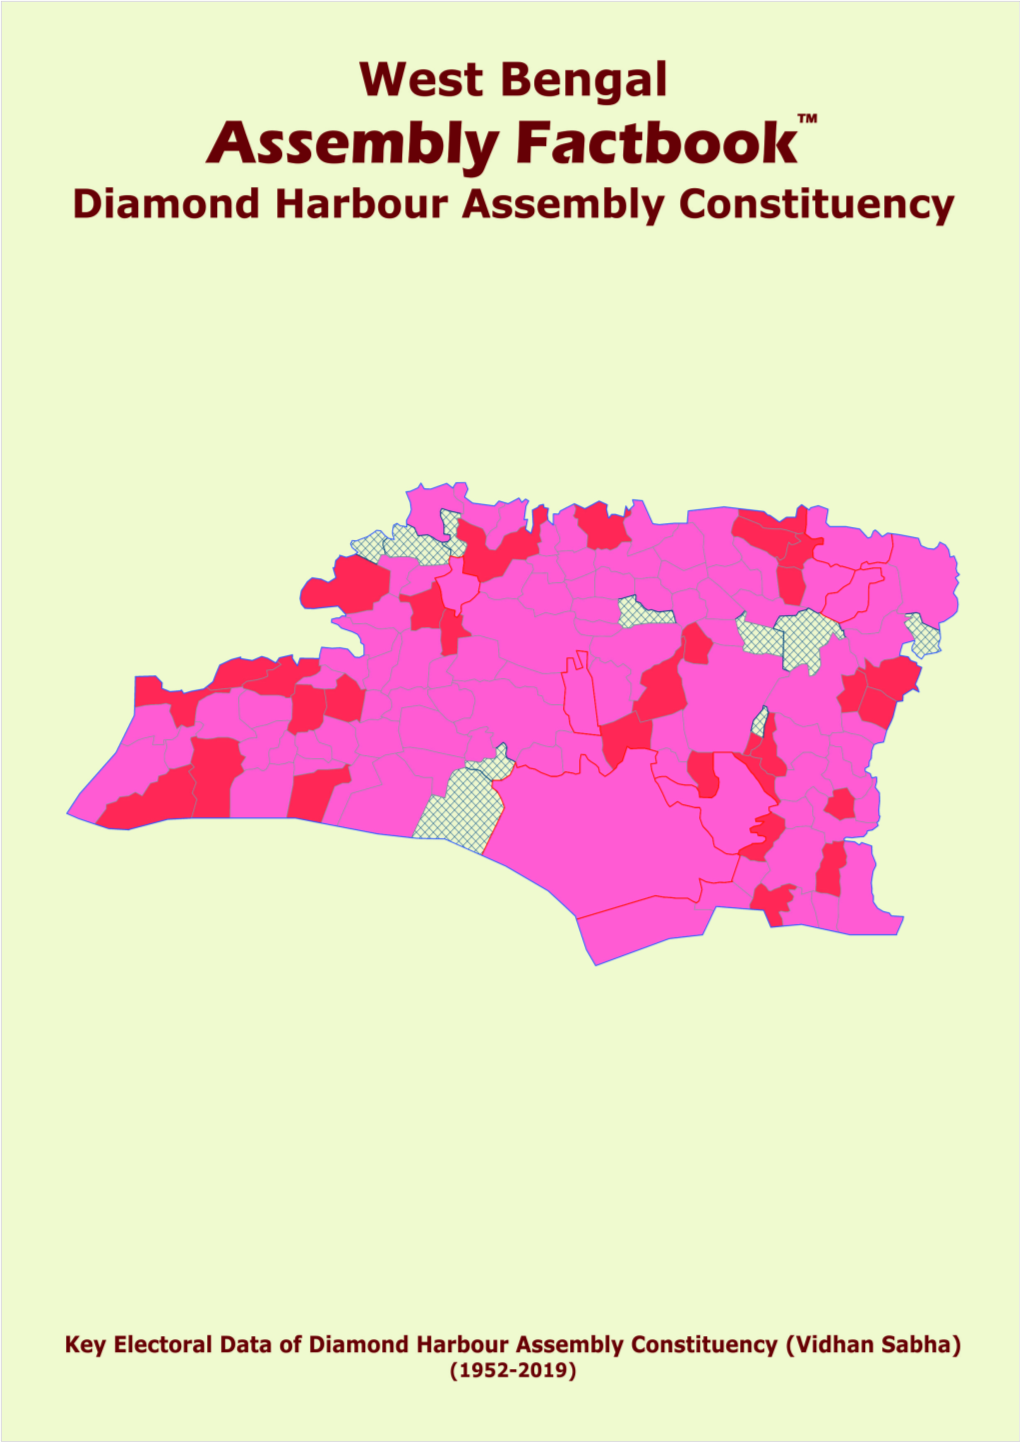 Diamond Harbour Assembly West Bengal Factbook